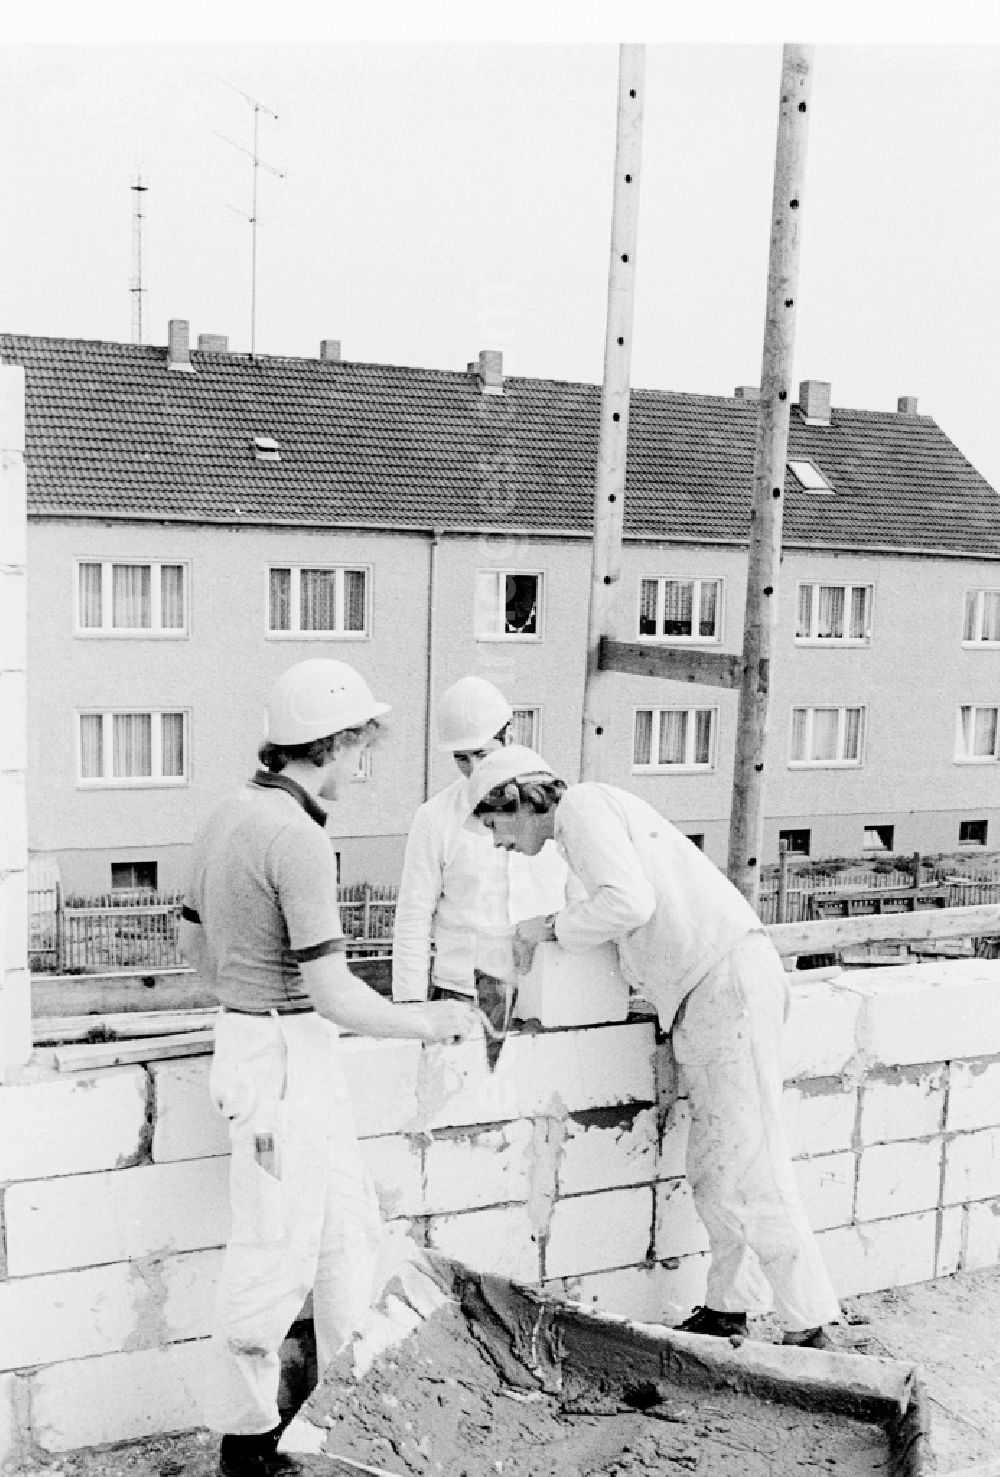 GDR image archive: Seelow - Mason at work in Seelow, in the present state of Brandenburg